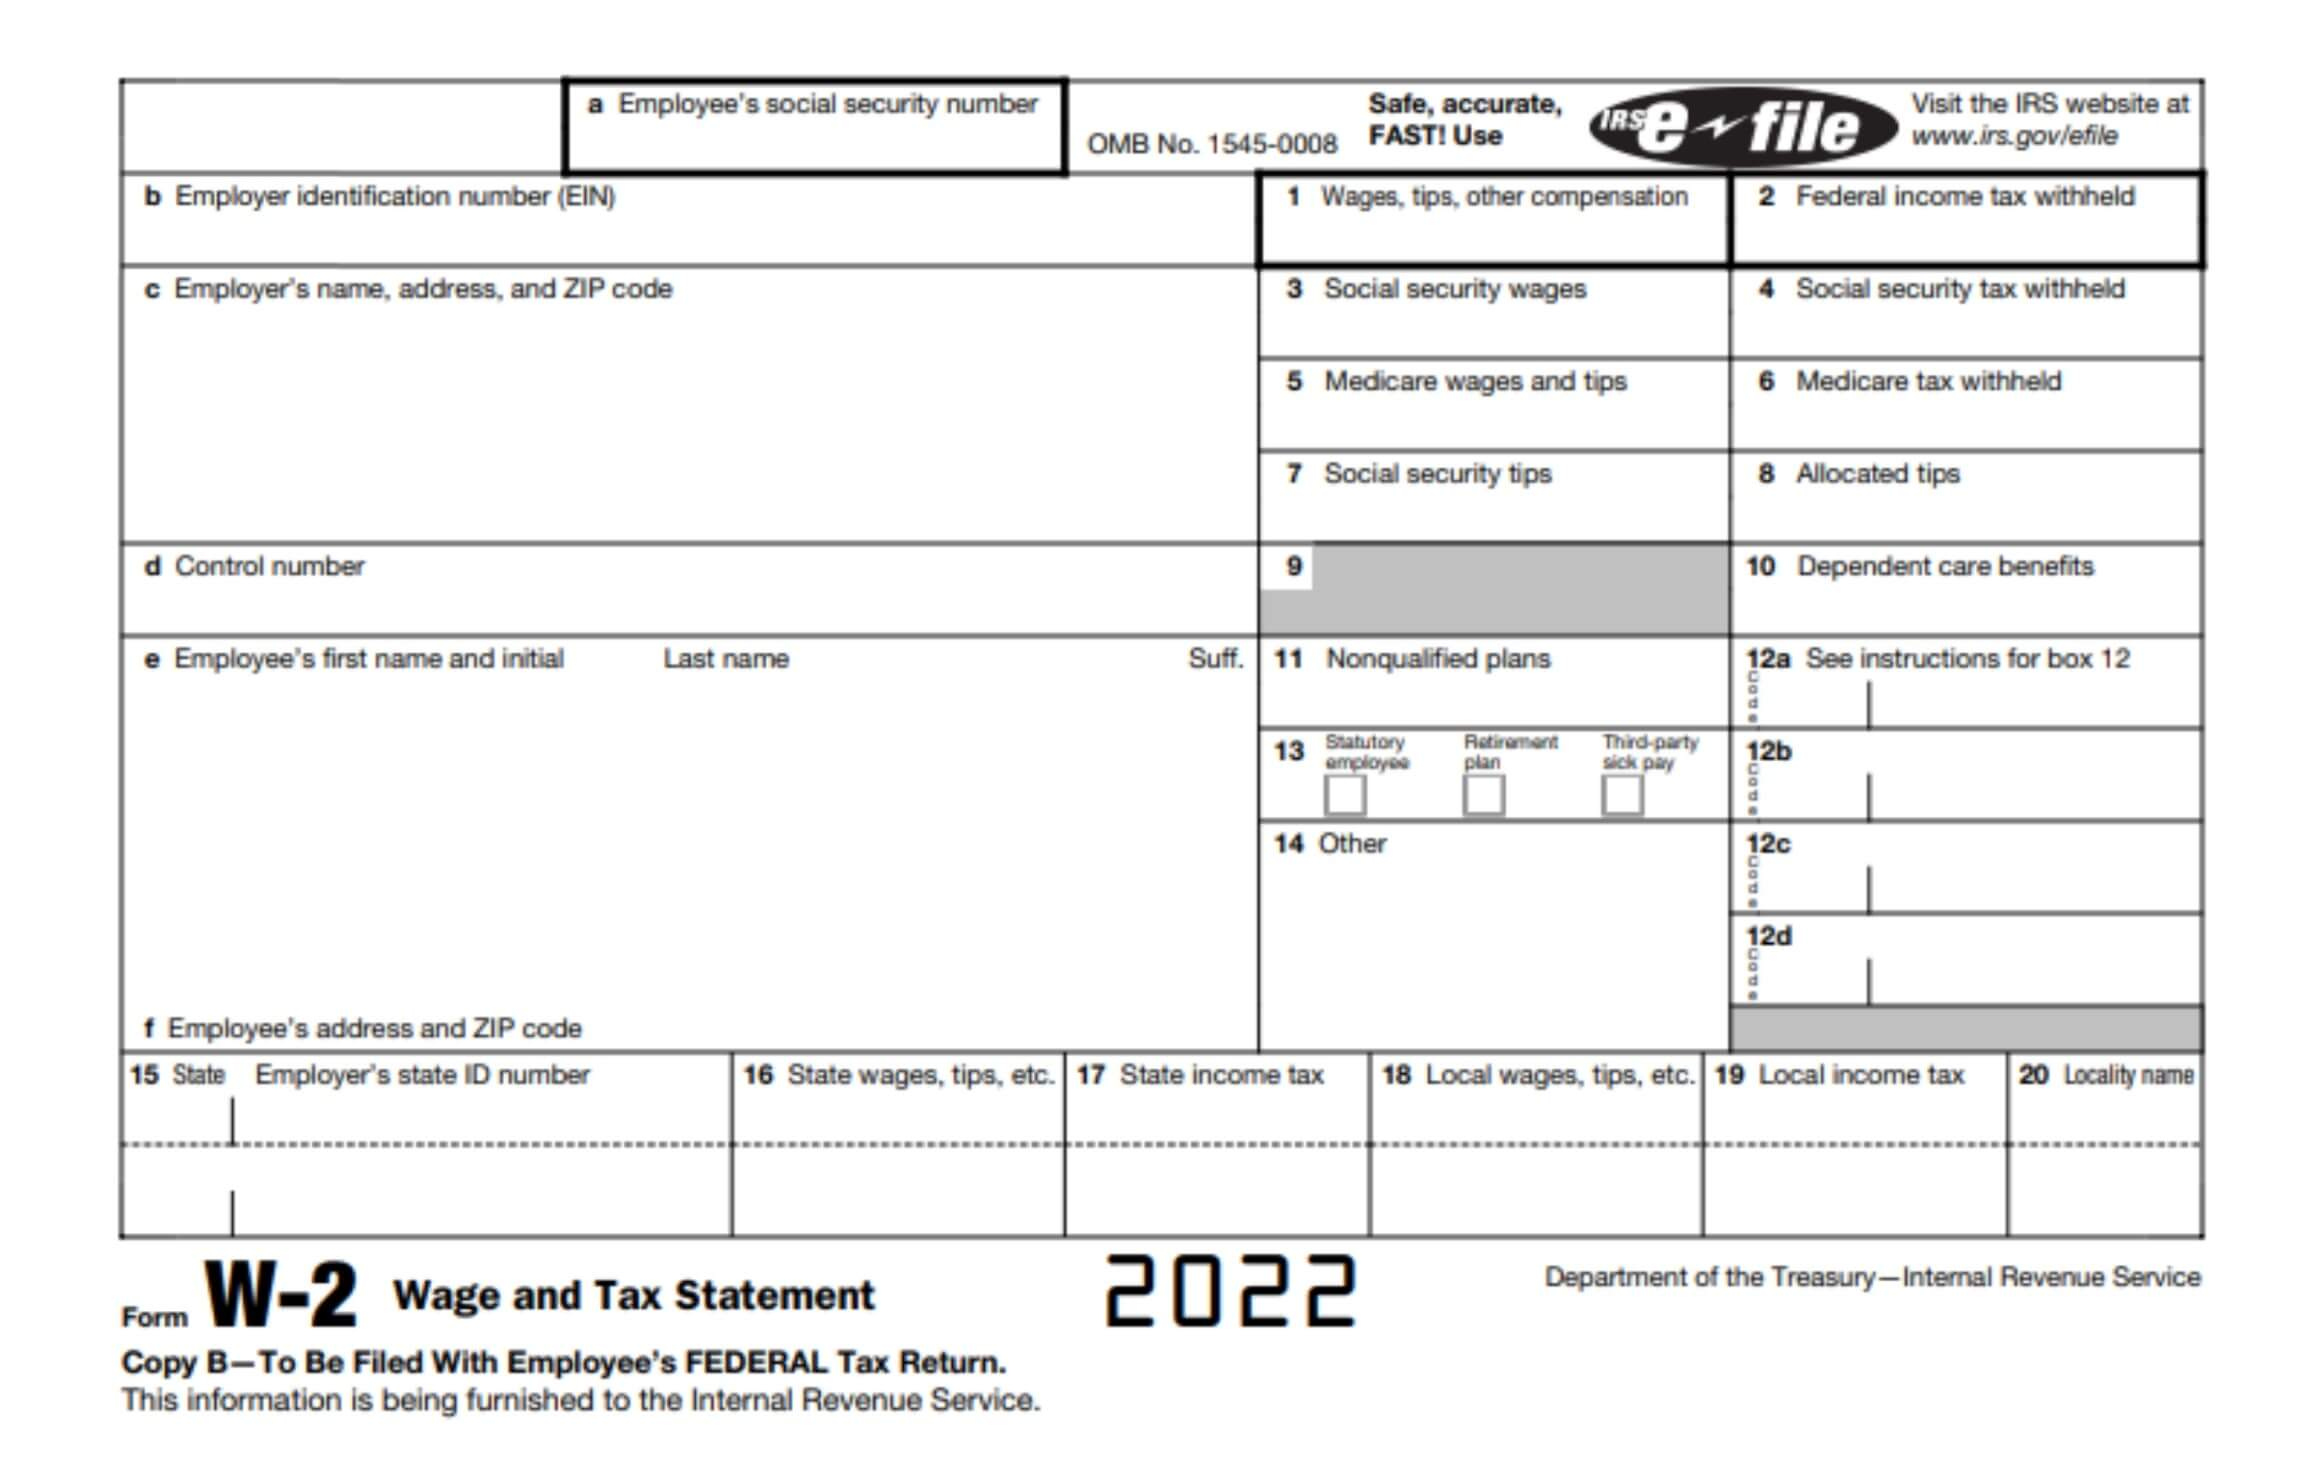 Understanding Your Irs Form W-2 inside W2 Form Irs